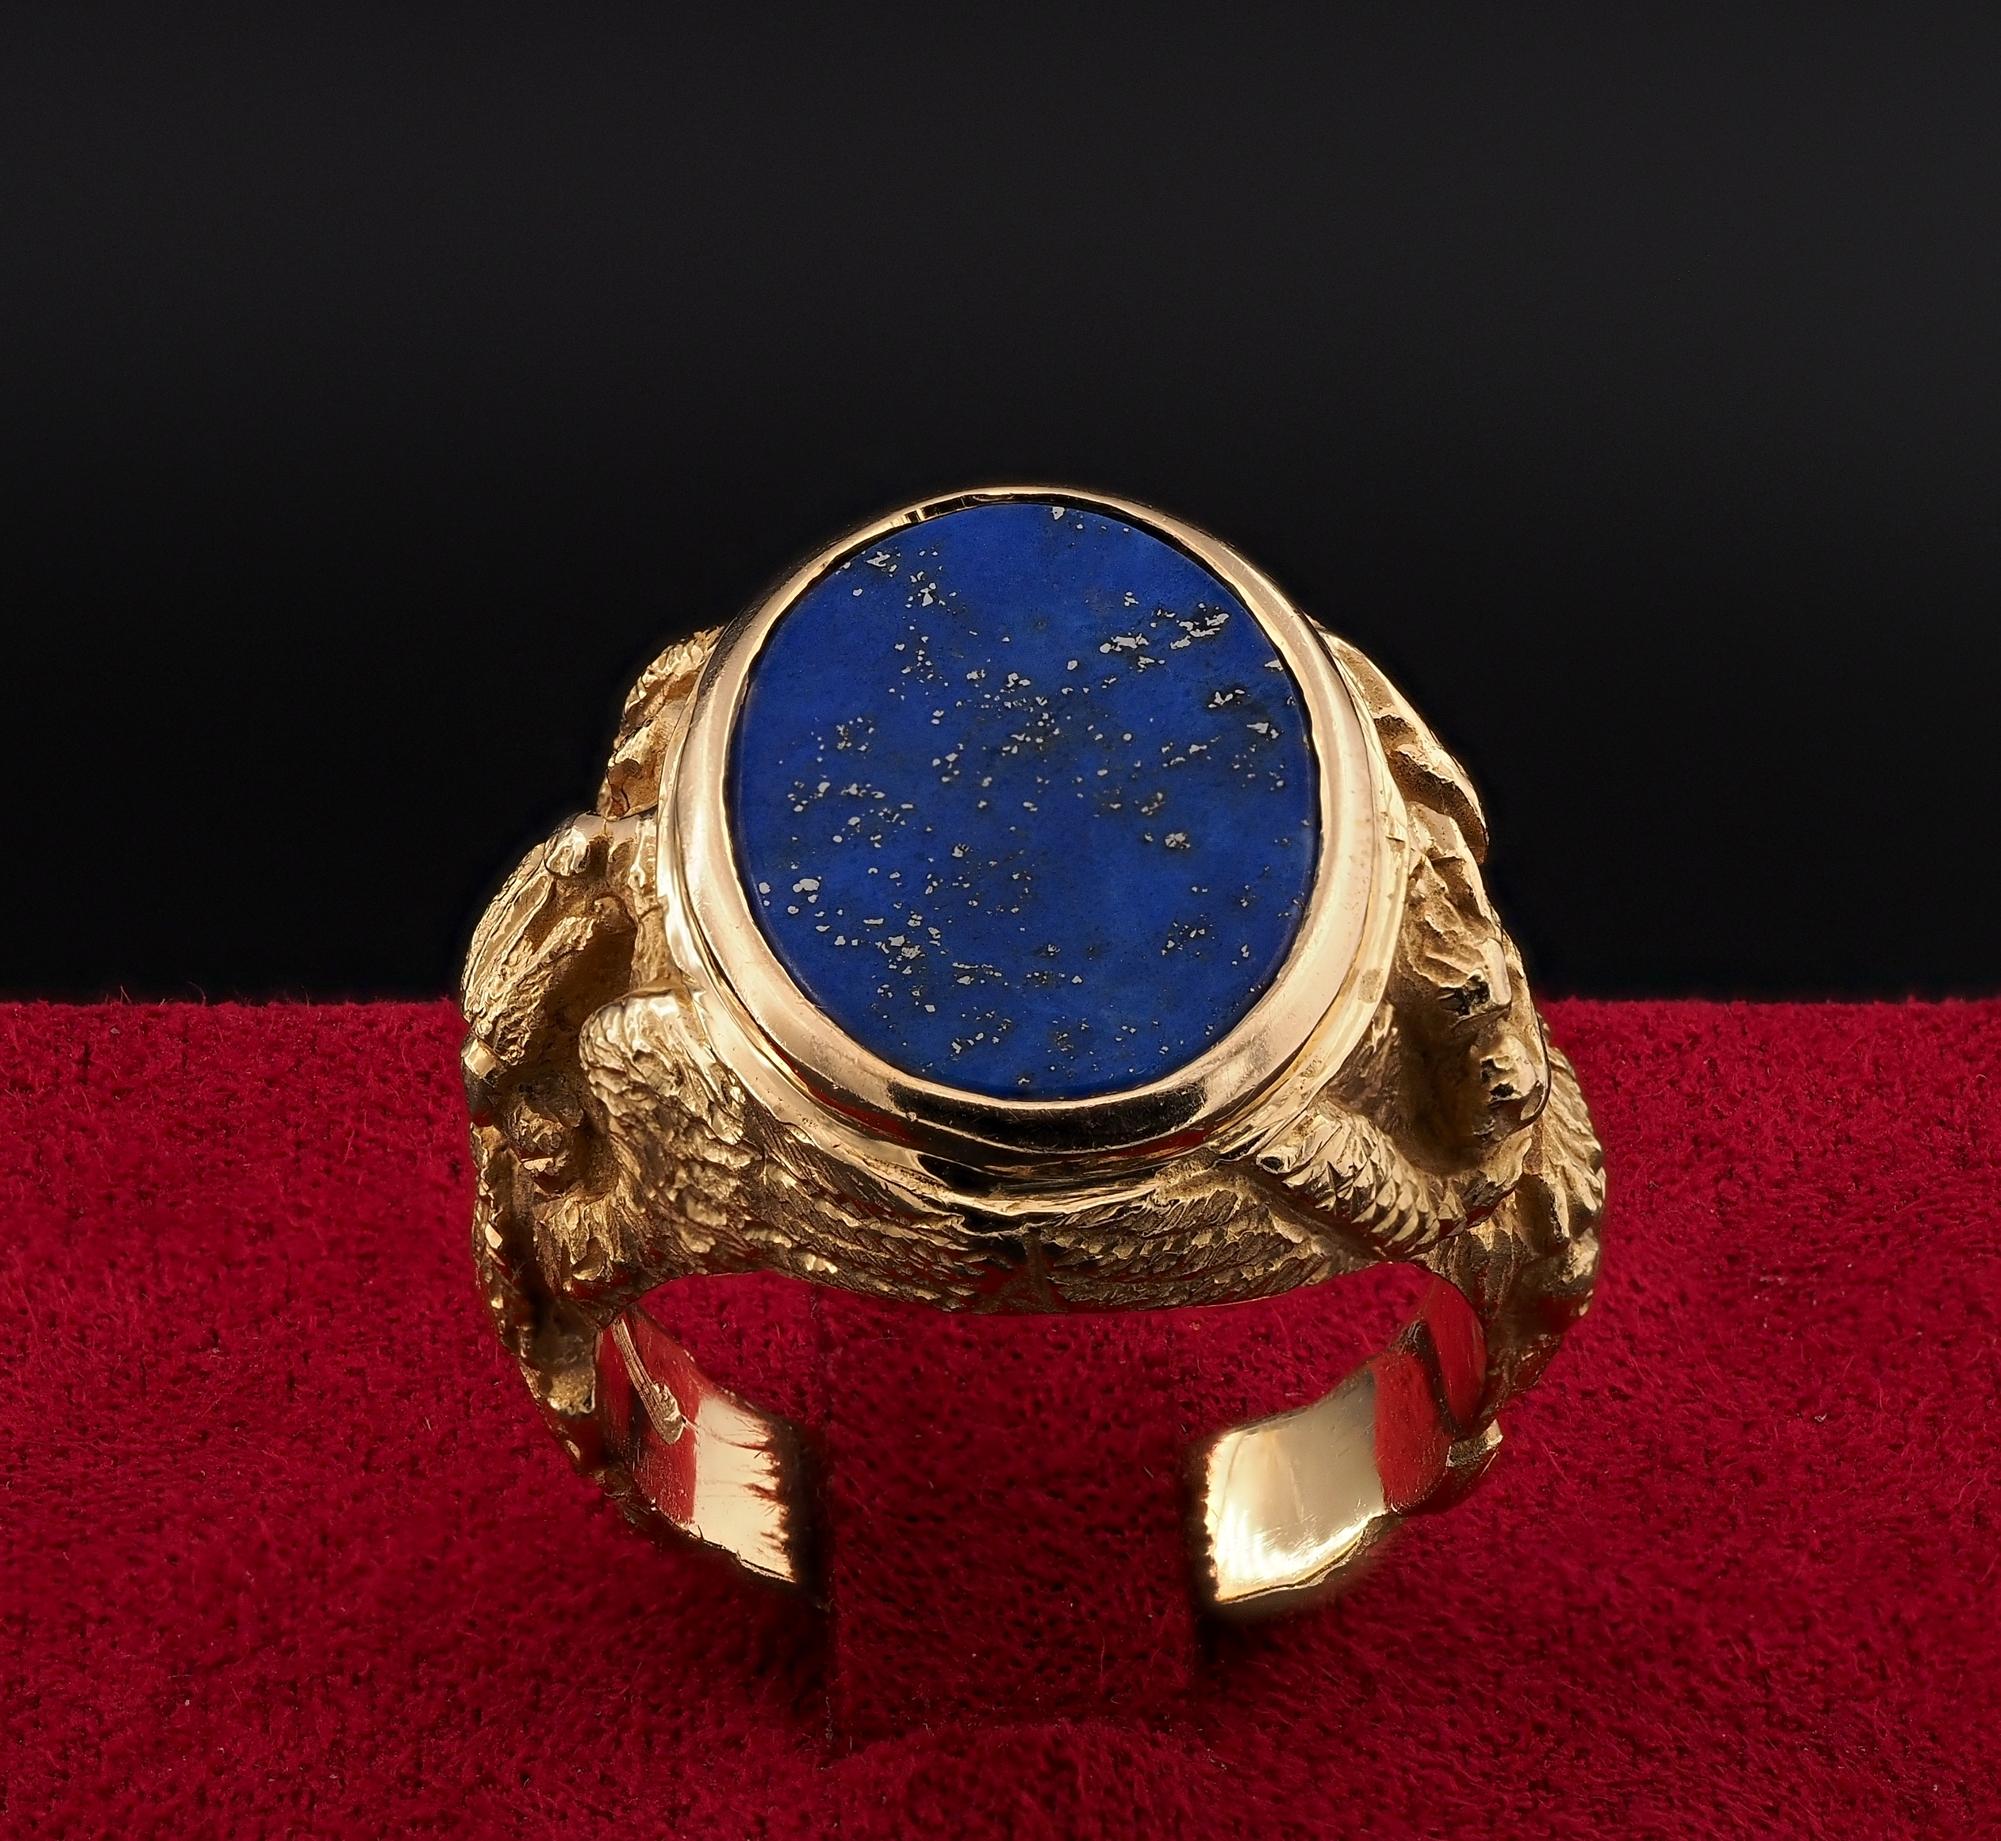 Artistry Sculptured
An impressive and quite unique Gent ring which is masterfully sculptured from solid 18 Kt gold – mid century age – Retro version of ancient Greek Mythical Beasts of legendary creatures taking inspiration from the ancient